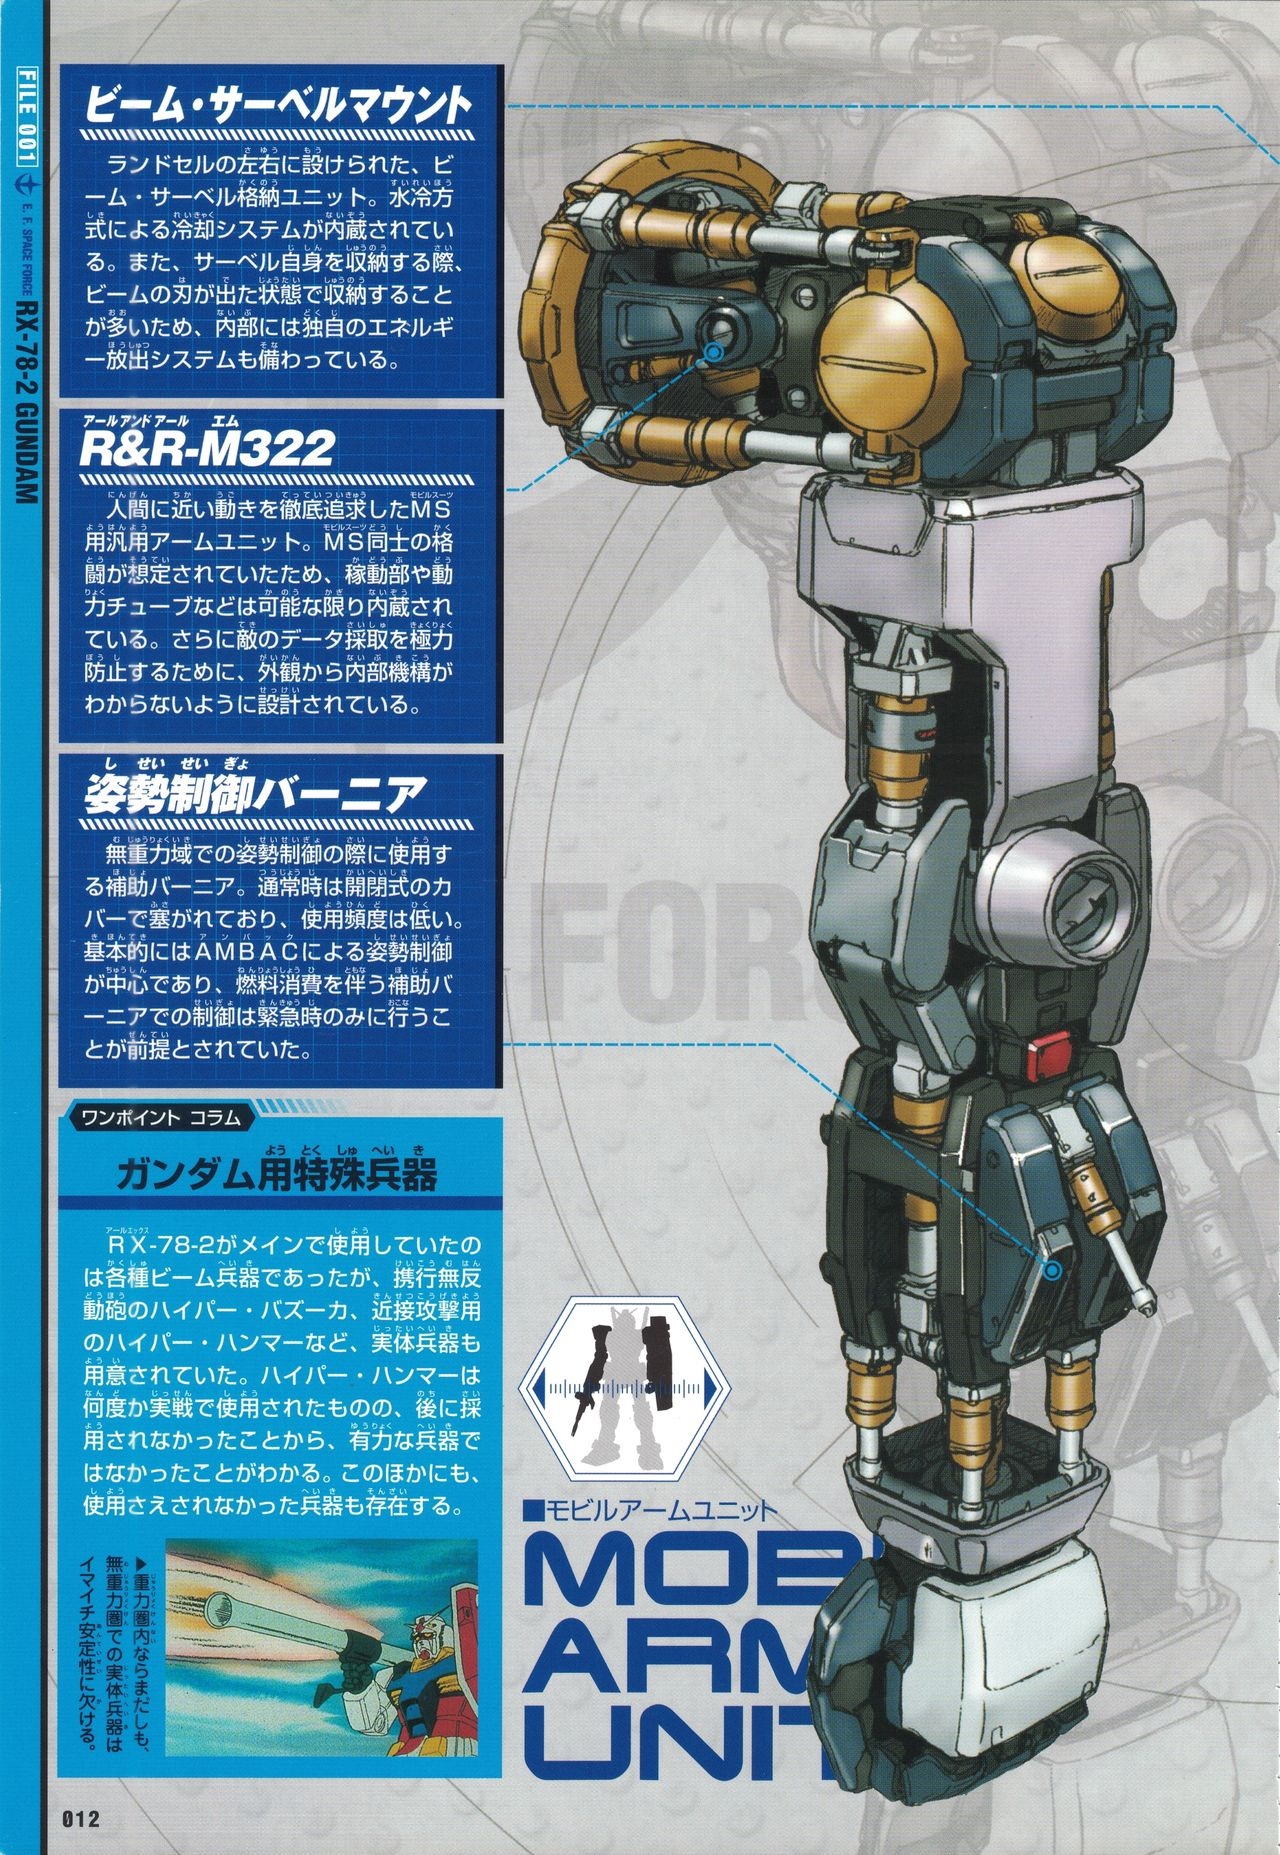 Mobile Suit Gundam - New Cross-Section Book - One Year War Edition 14